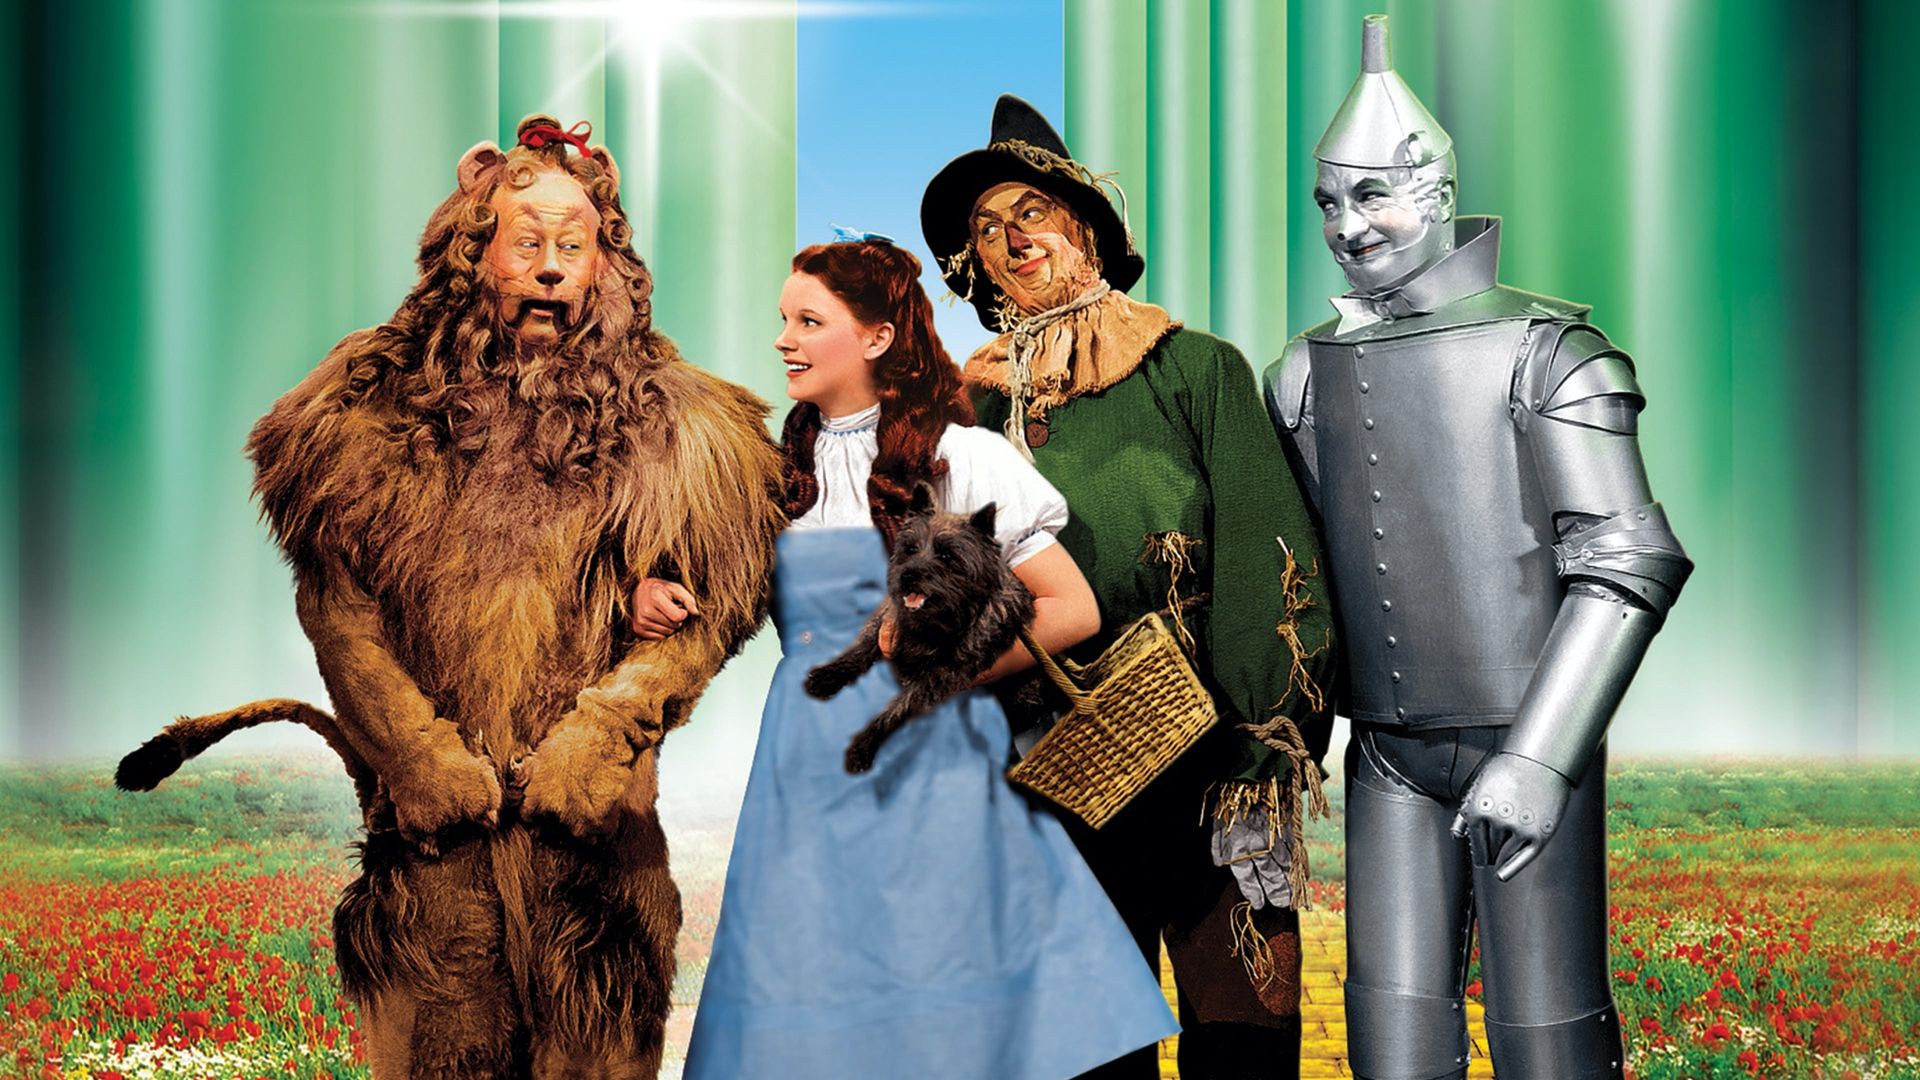 The Wizard of Oz Backdrop